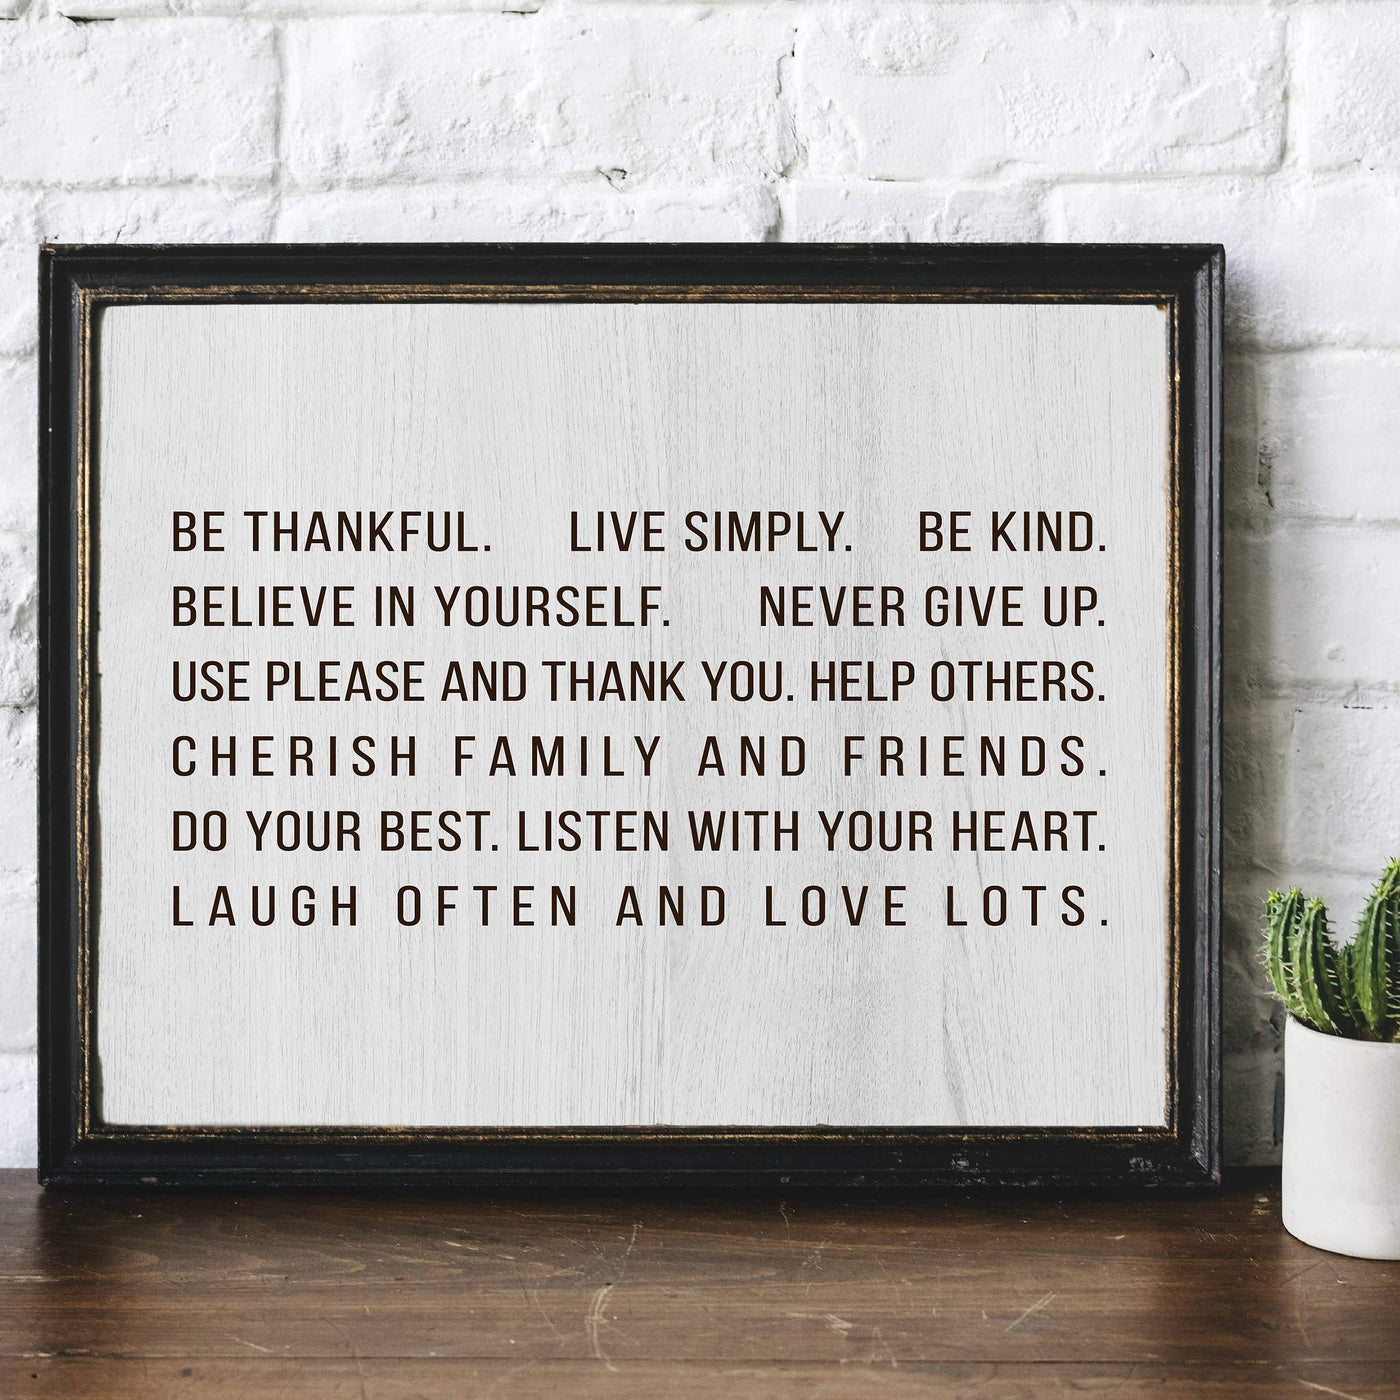 Listen With Your Heart-Laugh Often & Love Lots- Happy Life Rules Sign -14 x 11" Country Rustic Wall Art Print-Ready to Frame. Farmhouse Typographic Decor for Home-Office. Great Reminders For All!